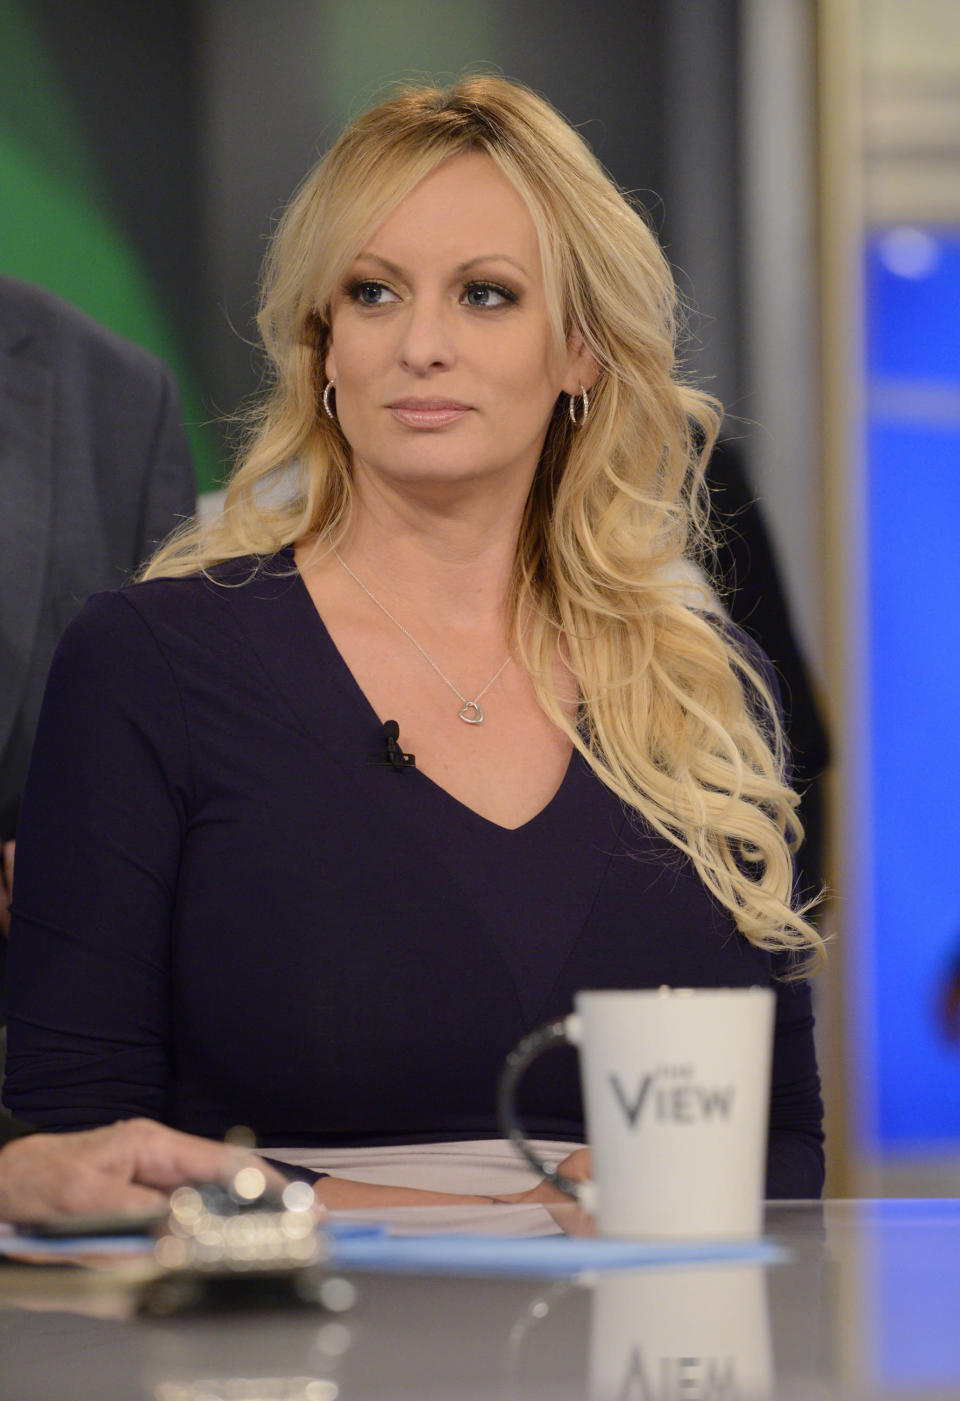 Stormy Daniels is sparing no detail about her alleged affair with Donald Trump. (Photo: Lorenzo Bevilaqua/ABC via Getty Images)